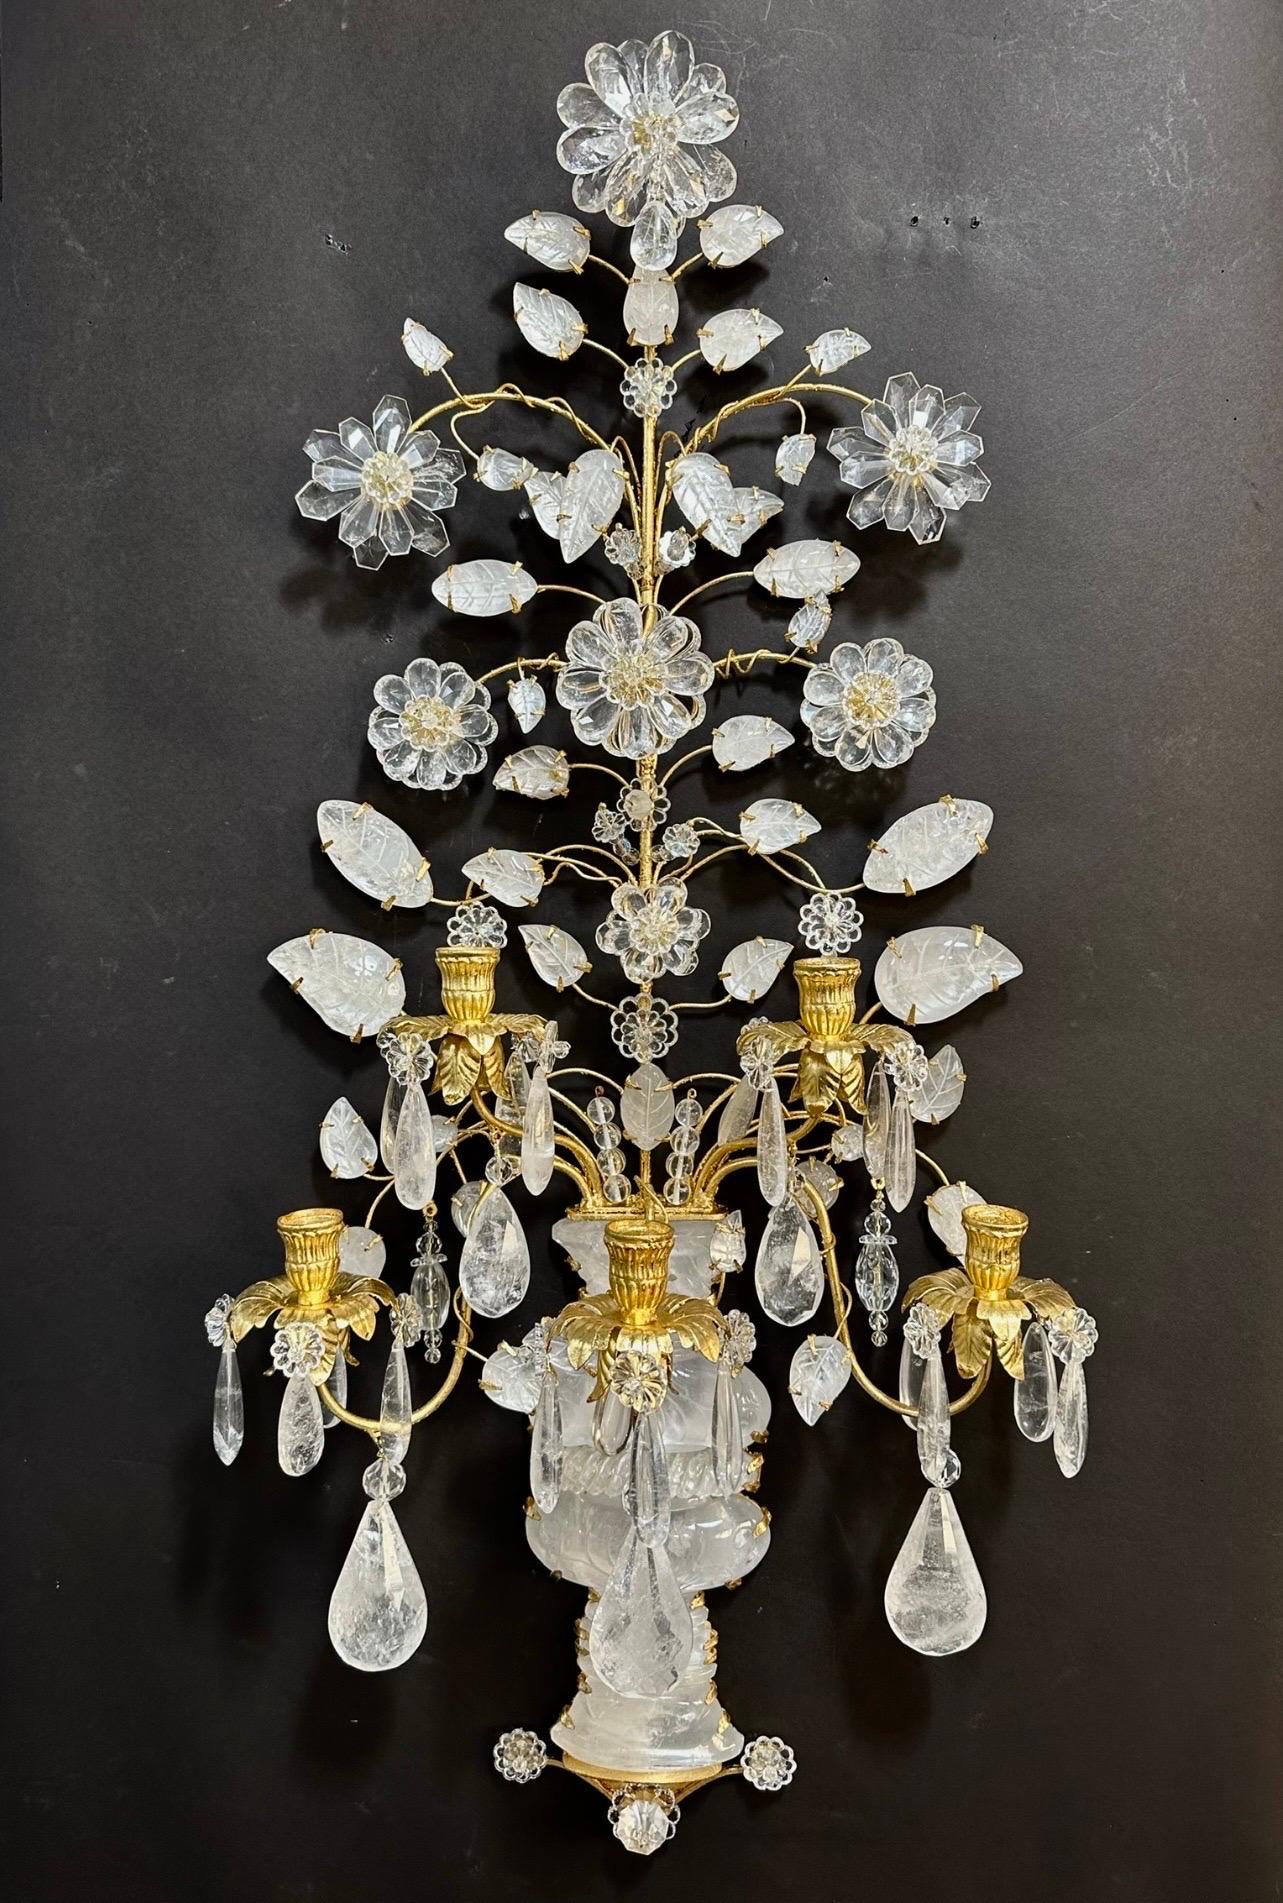 A wonderful pair of Maison Baguès style large rock / quartz crystal 5 candelabra arm with urn form base leading to flowers and leaf bouquet sconces.
Wiring is available for $500 for the pair.